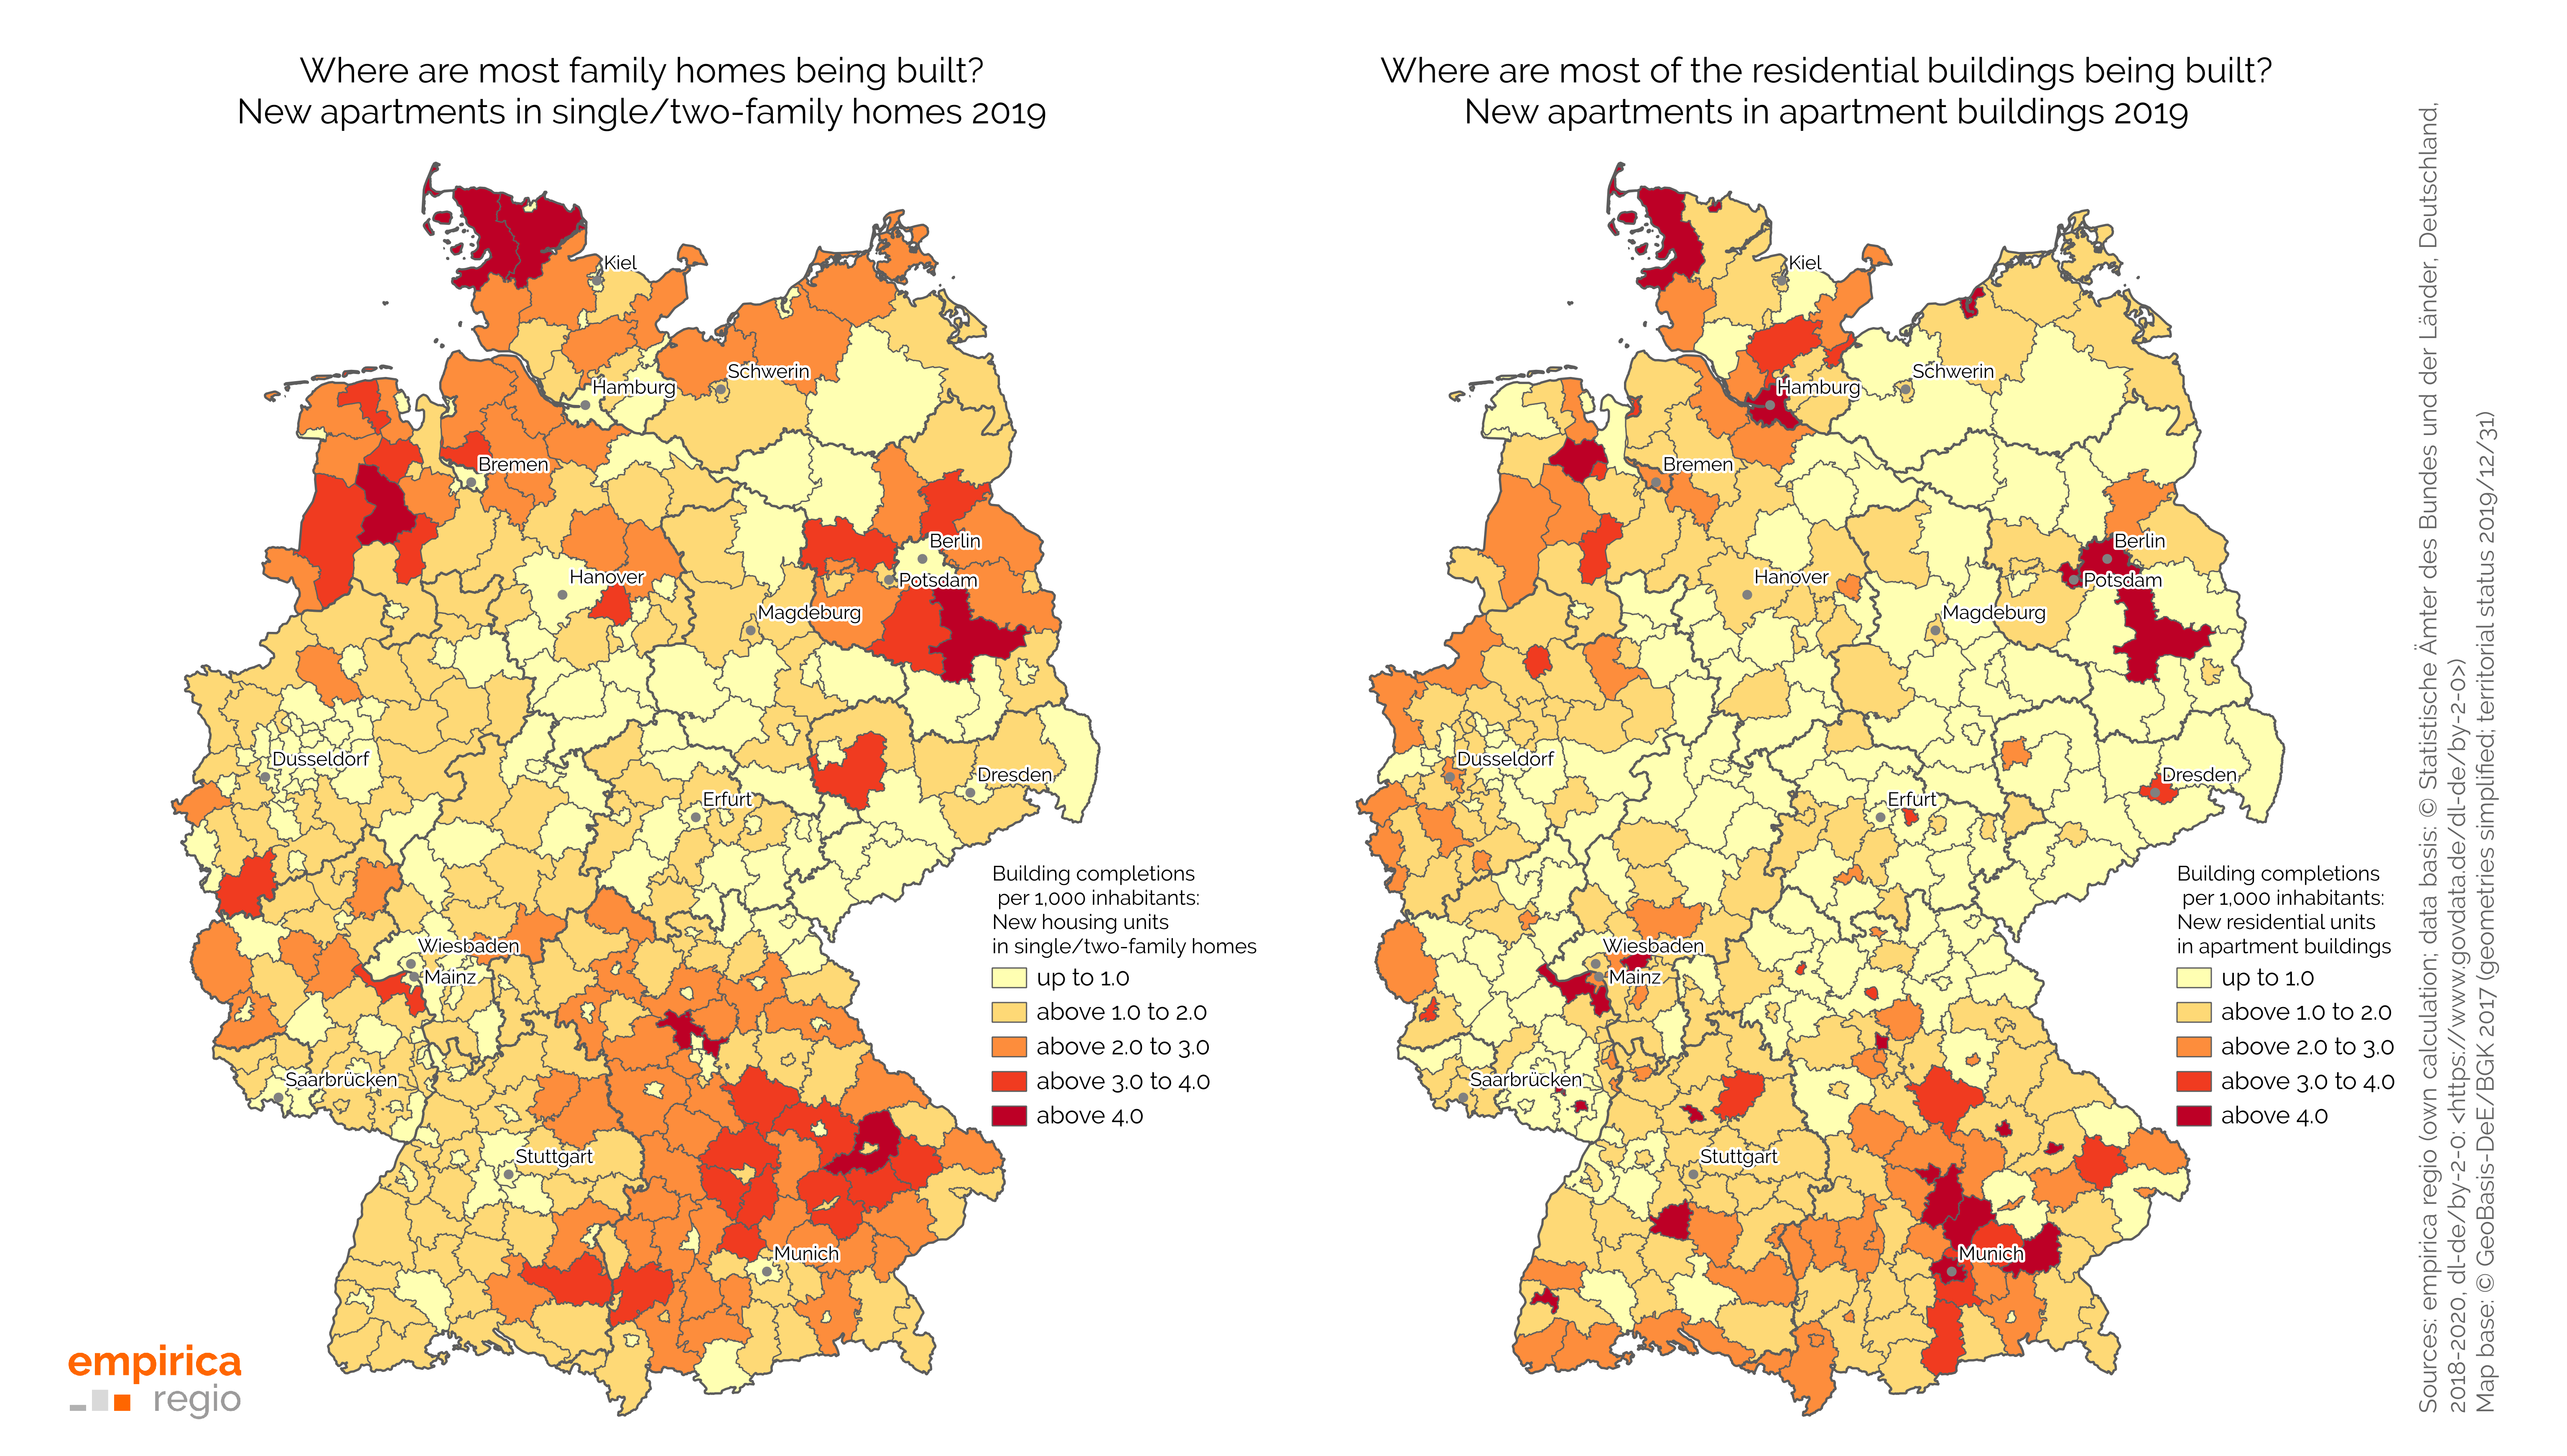 Construction intensity for new apartments in single/two-family houses and apartment buildings in the districts in Germany